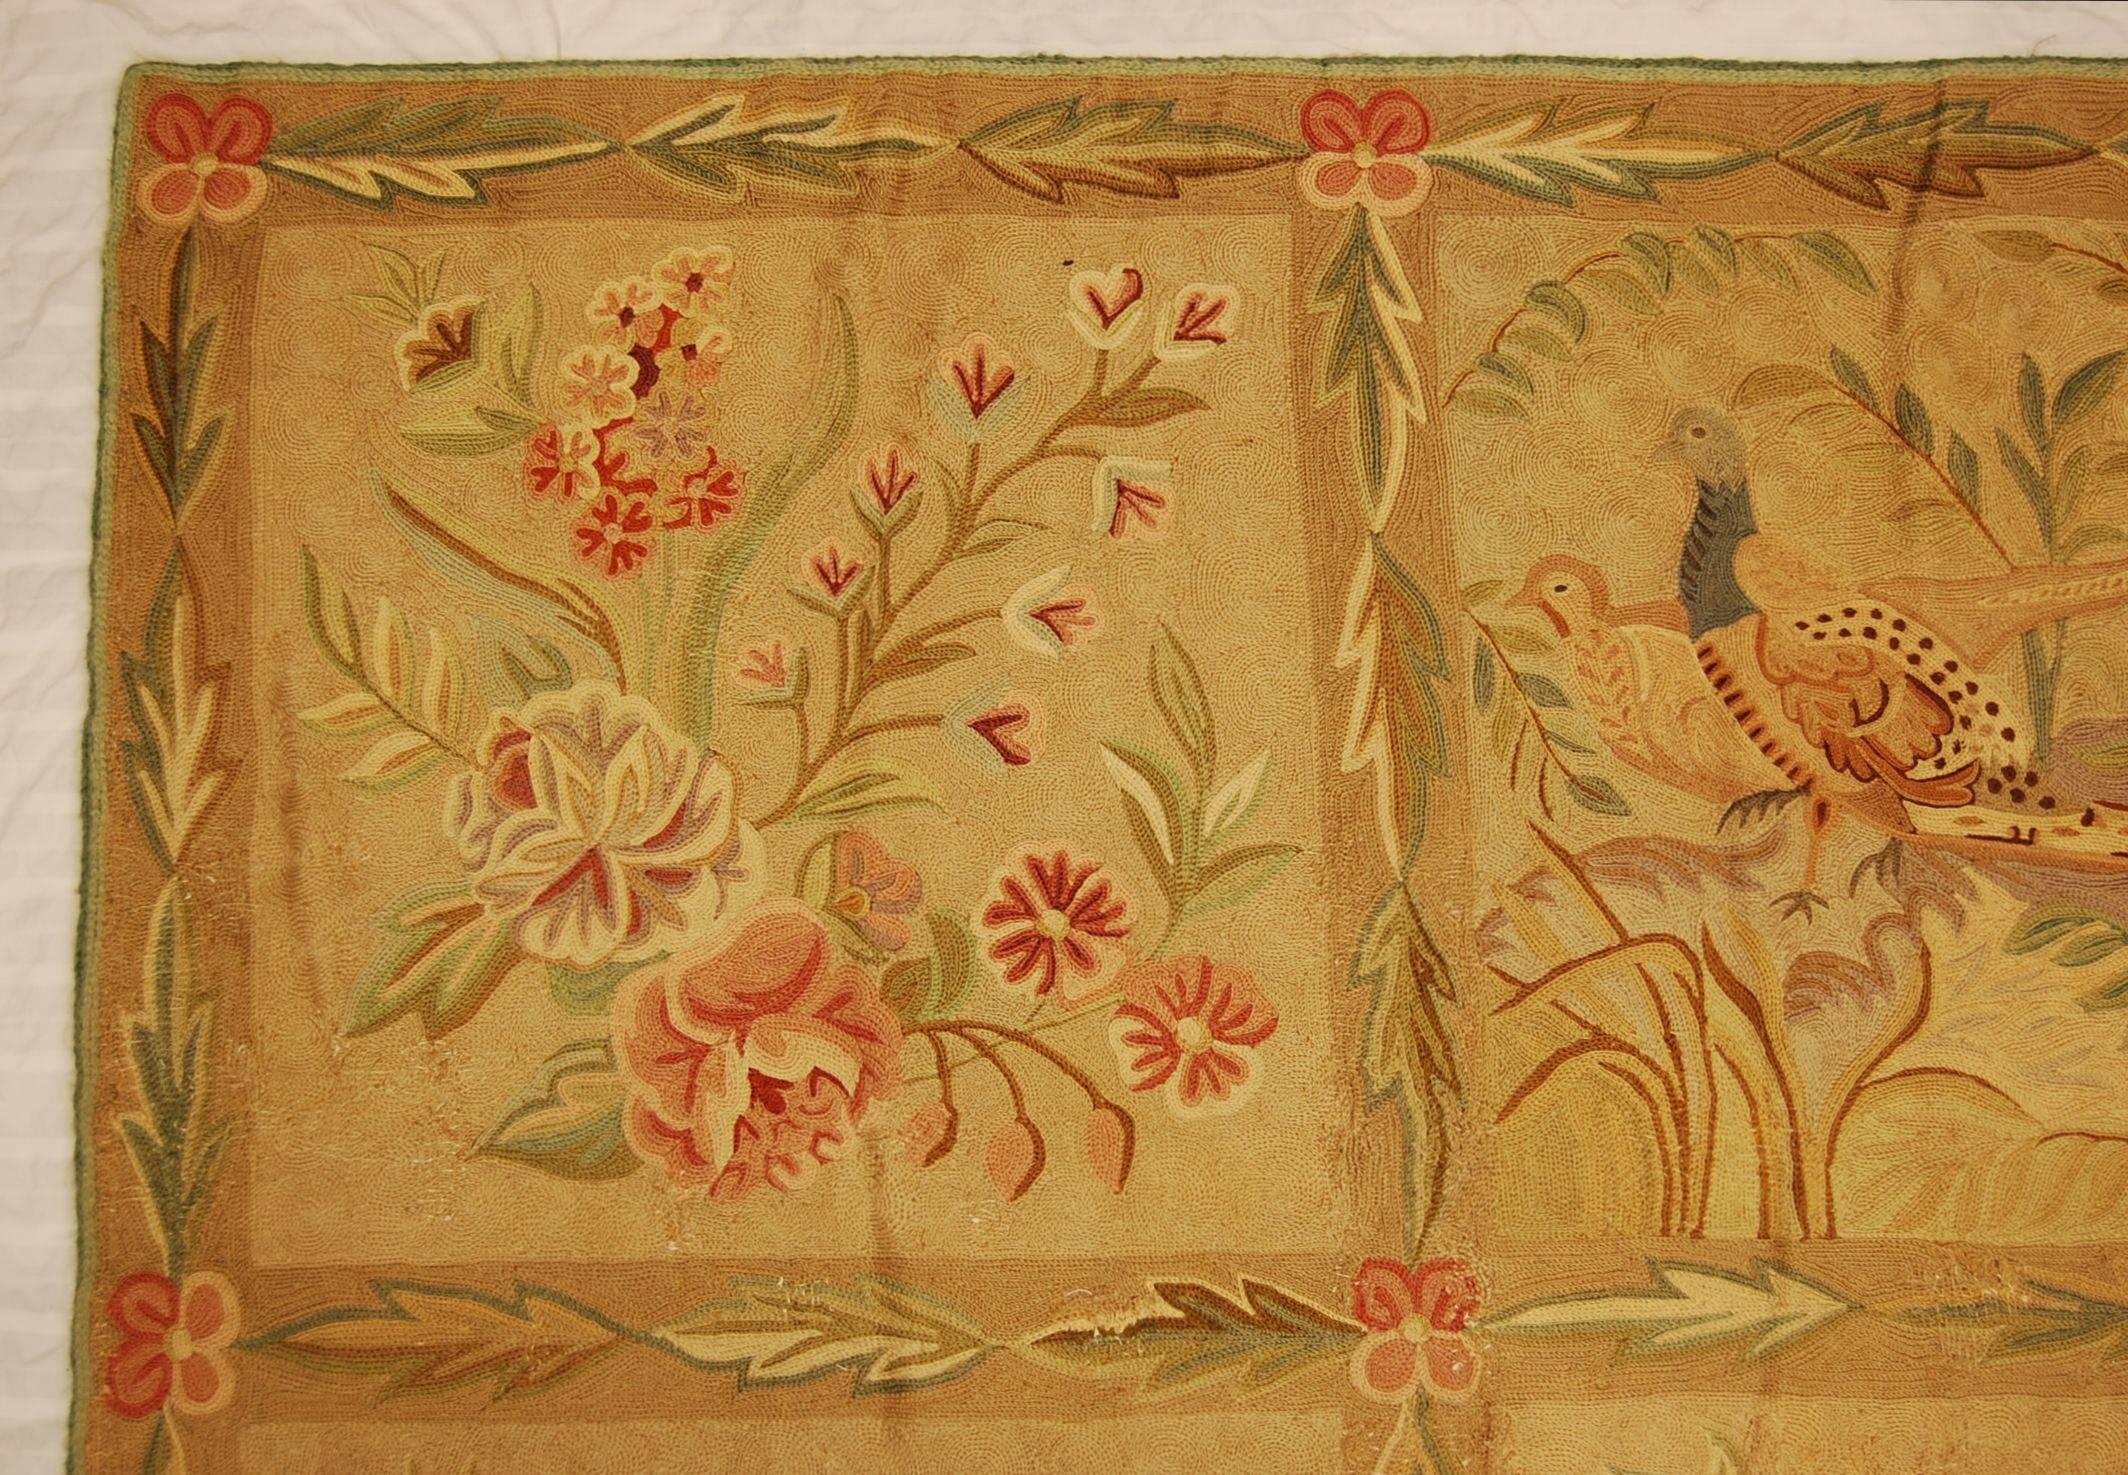 Made by the F. Schumacher Company who imported them from India from the 1930s-1960s. These were sold through their New York showroom and were available in several different sizes. This rug shows various birds and vegetation on a natural colored